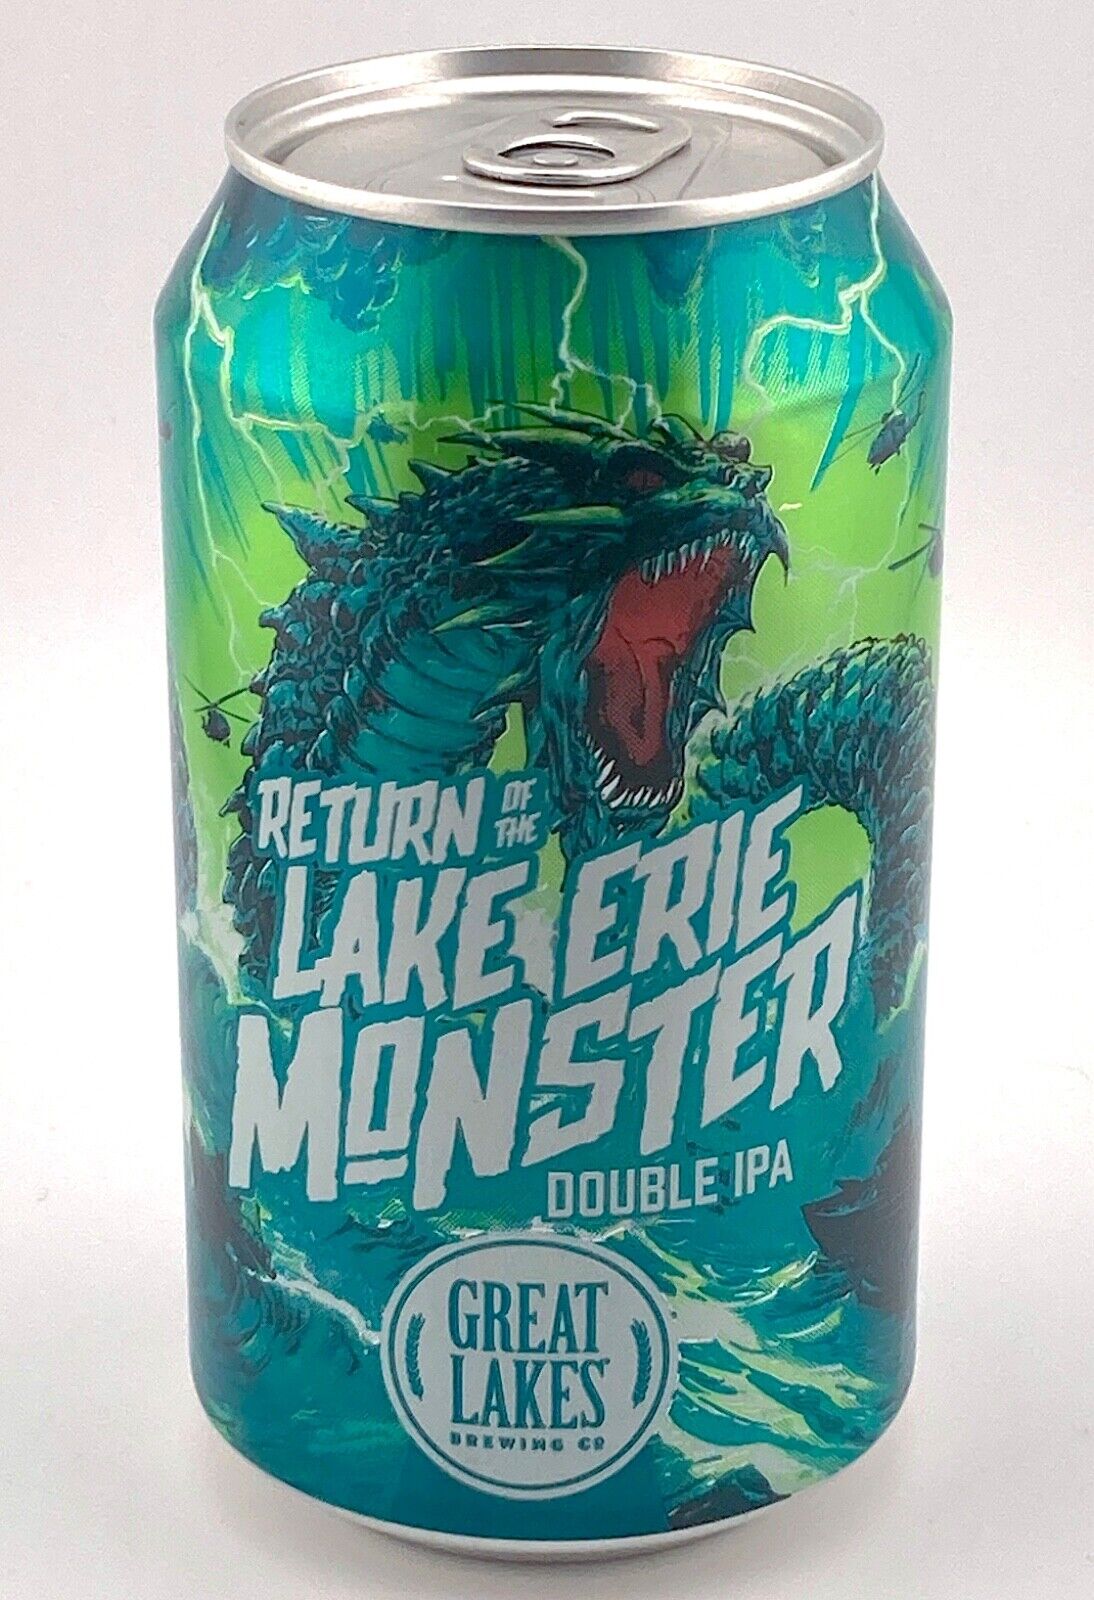 Great Lakes Brewing Co RETURN OF THE LAKE ERIE MONSTER Double IPA 12oz Beer Can